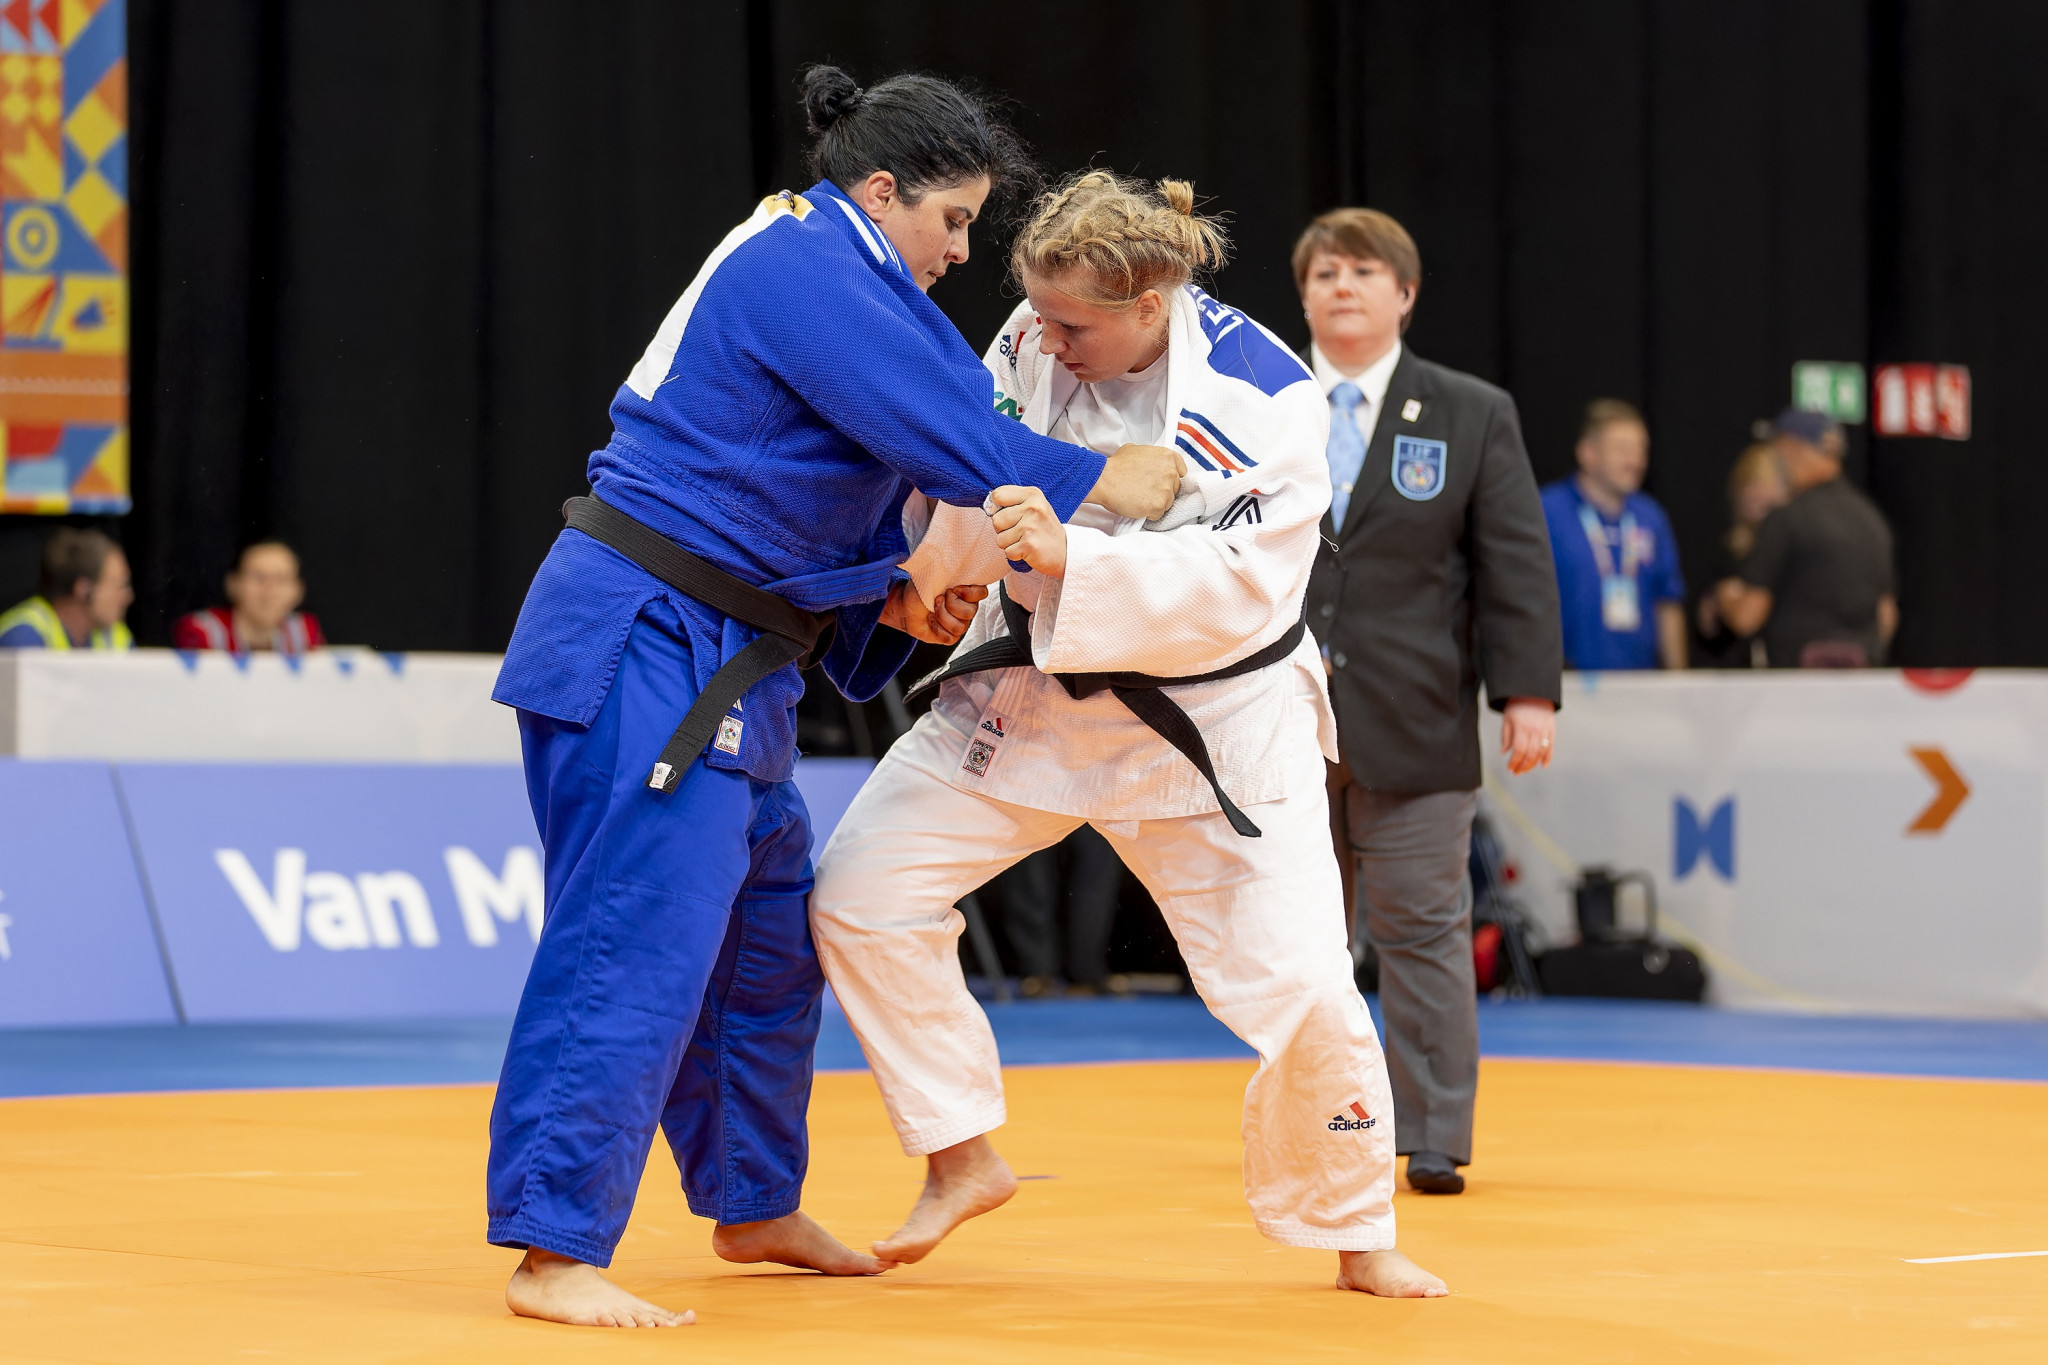 France's Prescillia Leze, right, was among the gold medallists in the morning's sessions following the round-robin matches ©EPC